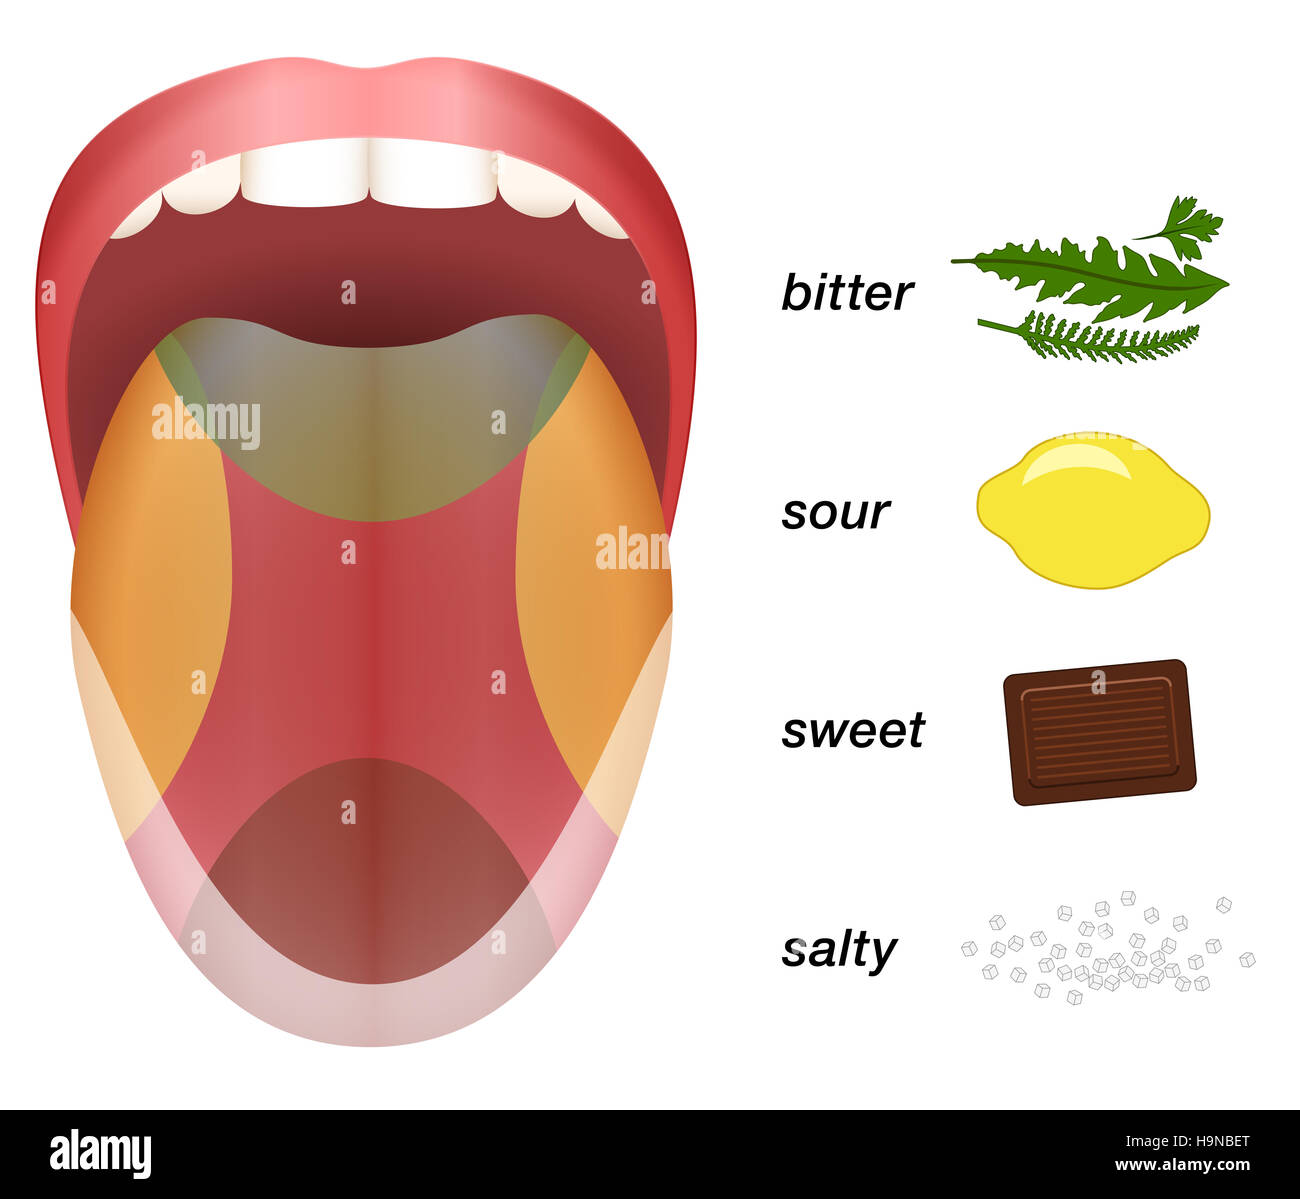 Bitter, sour, sweet and salty taste represented by herbs, lemons, chocolate and grains of salt on a tongue. Stock Photo